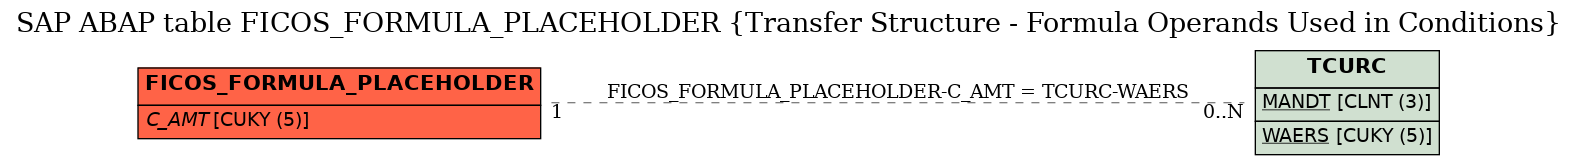 E-R Diagram for table FICOS_FORMULA_PLACEHOLDER (Transfer Structure - Formula Operands Used in Conditions)